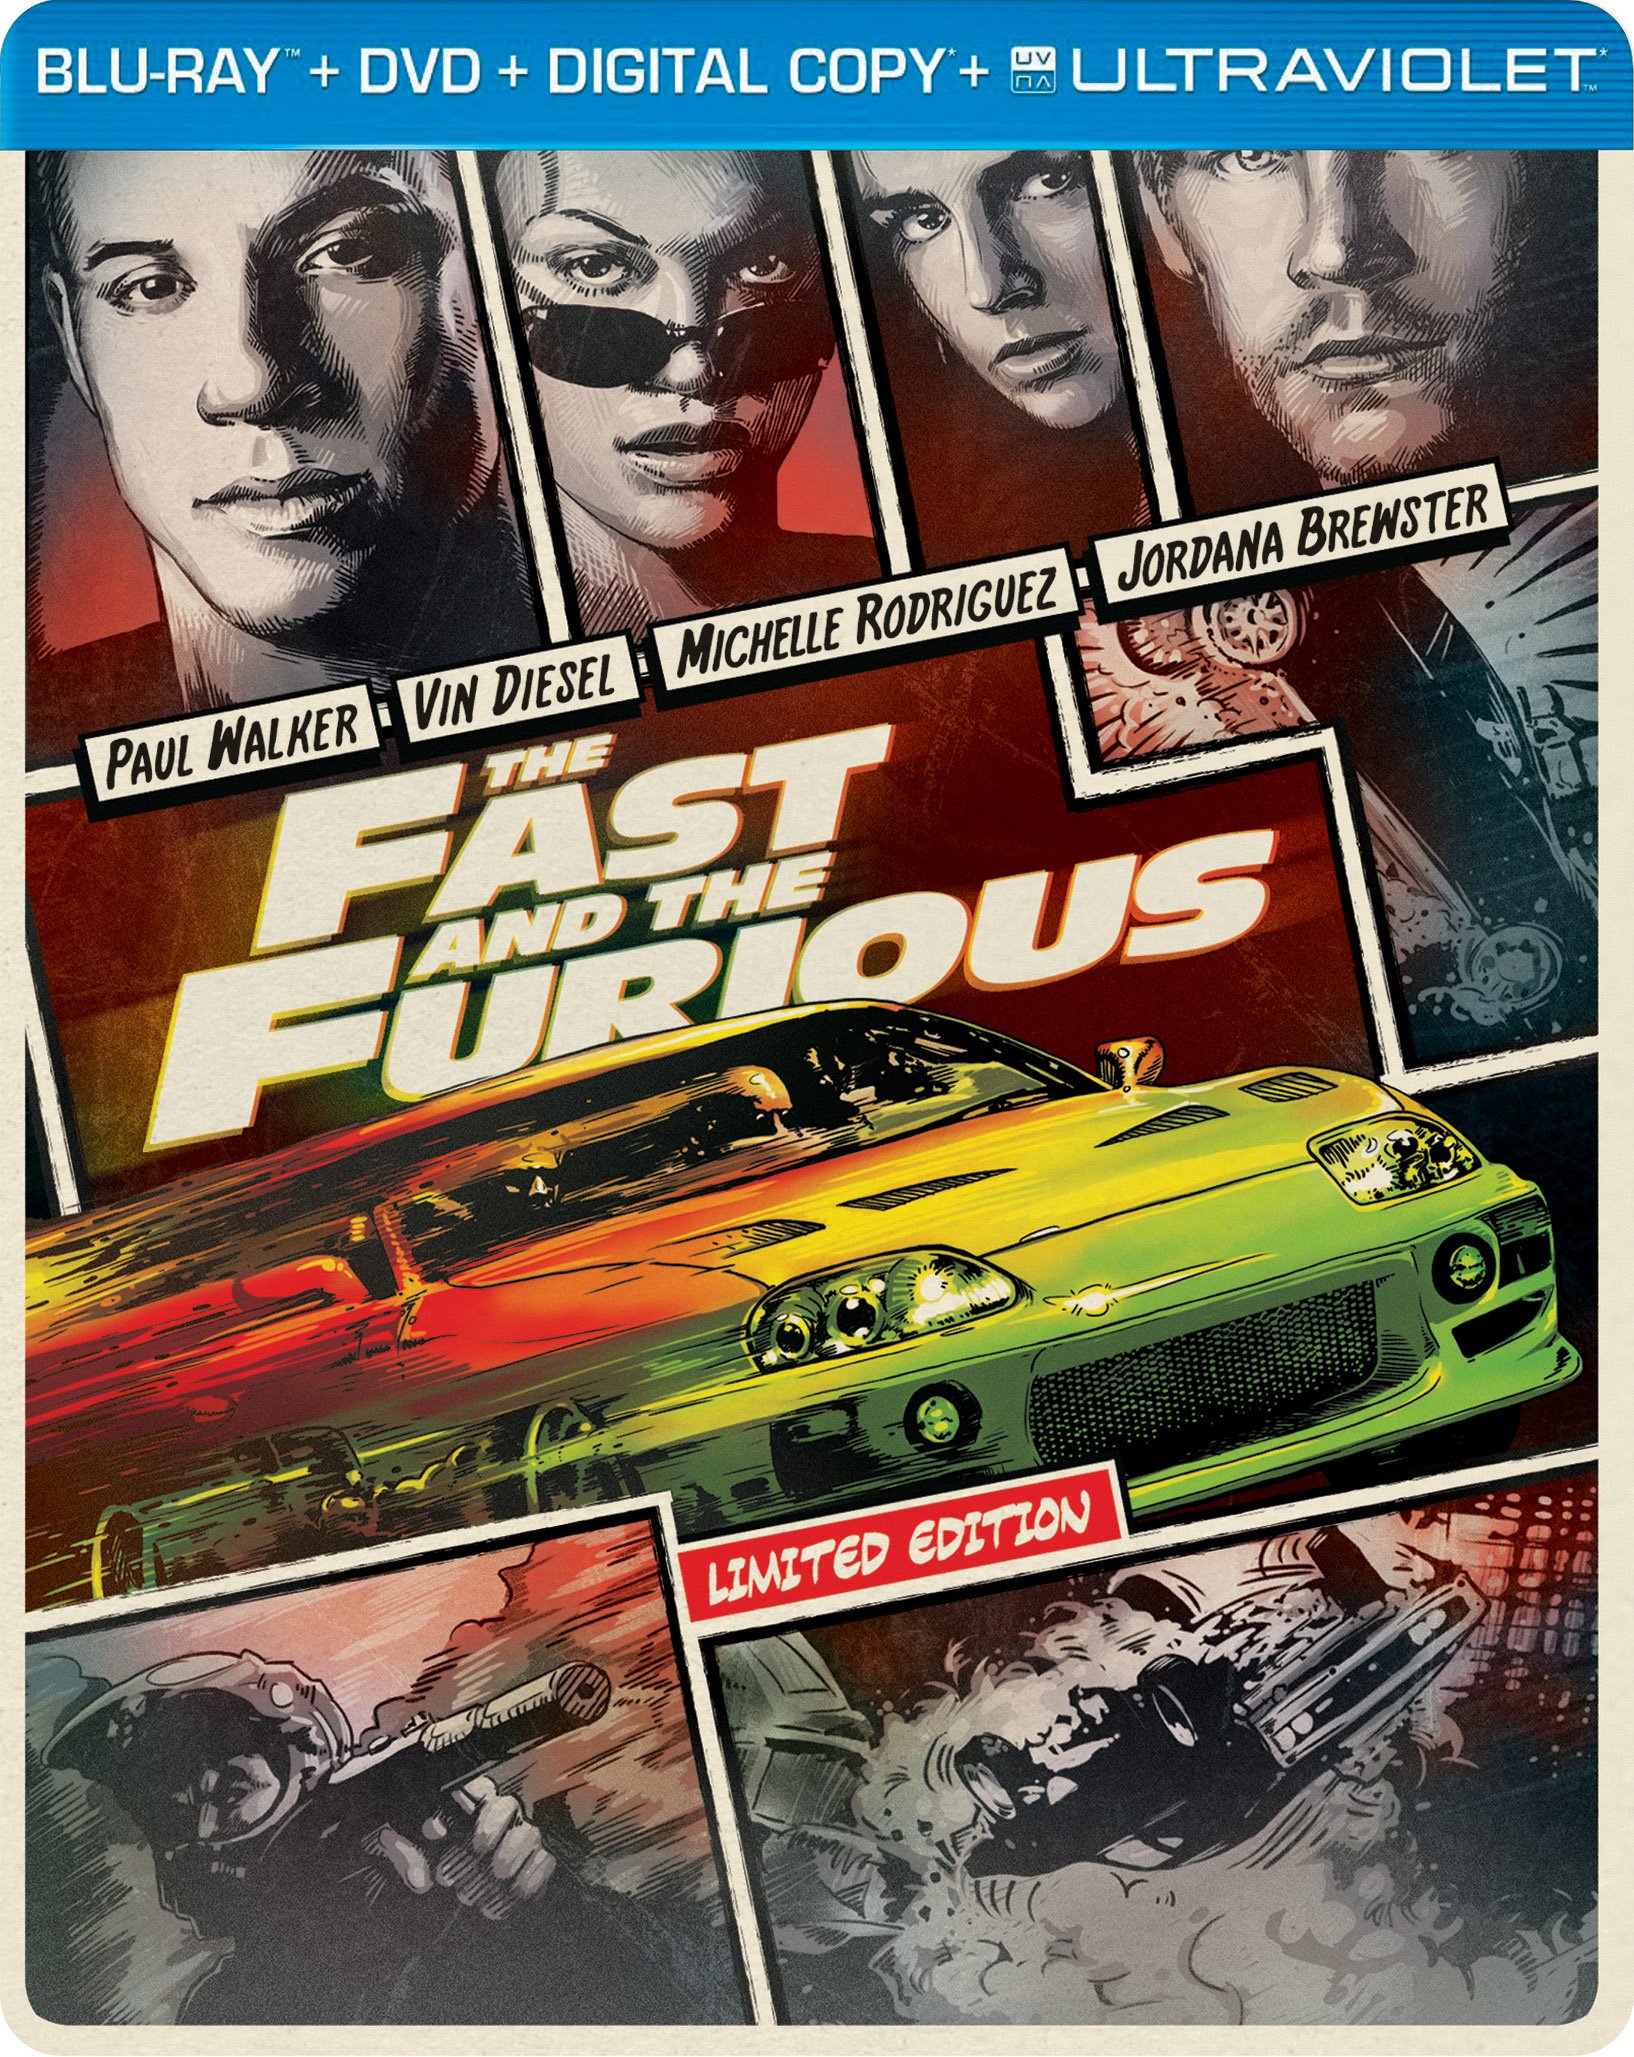 The Fast and the Furious DVD Release Date January 2, 20021634 x 2057